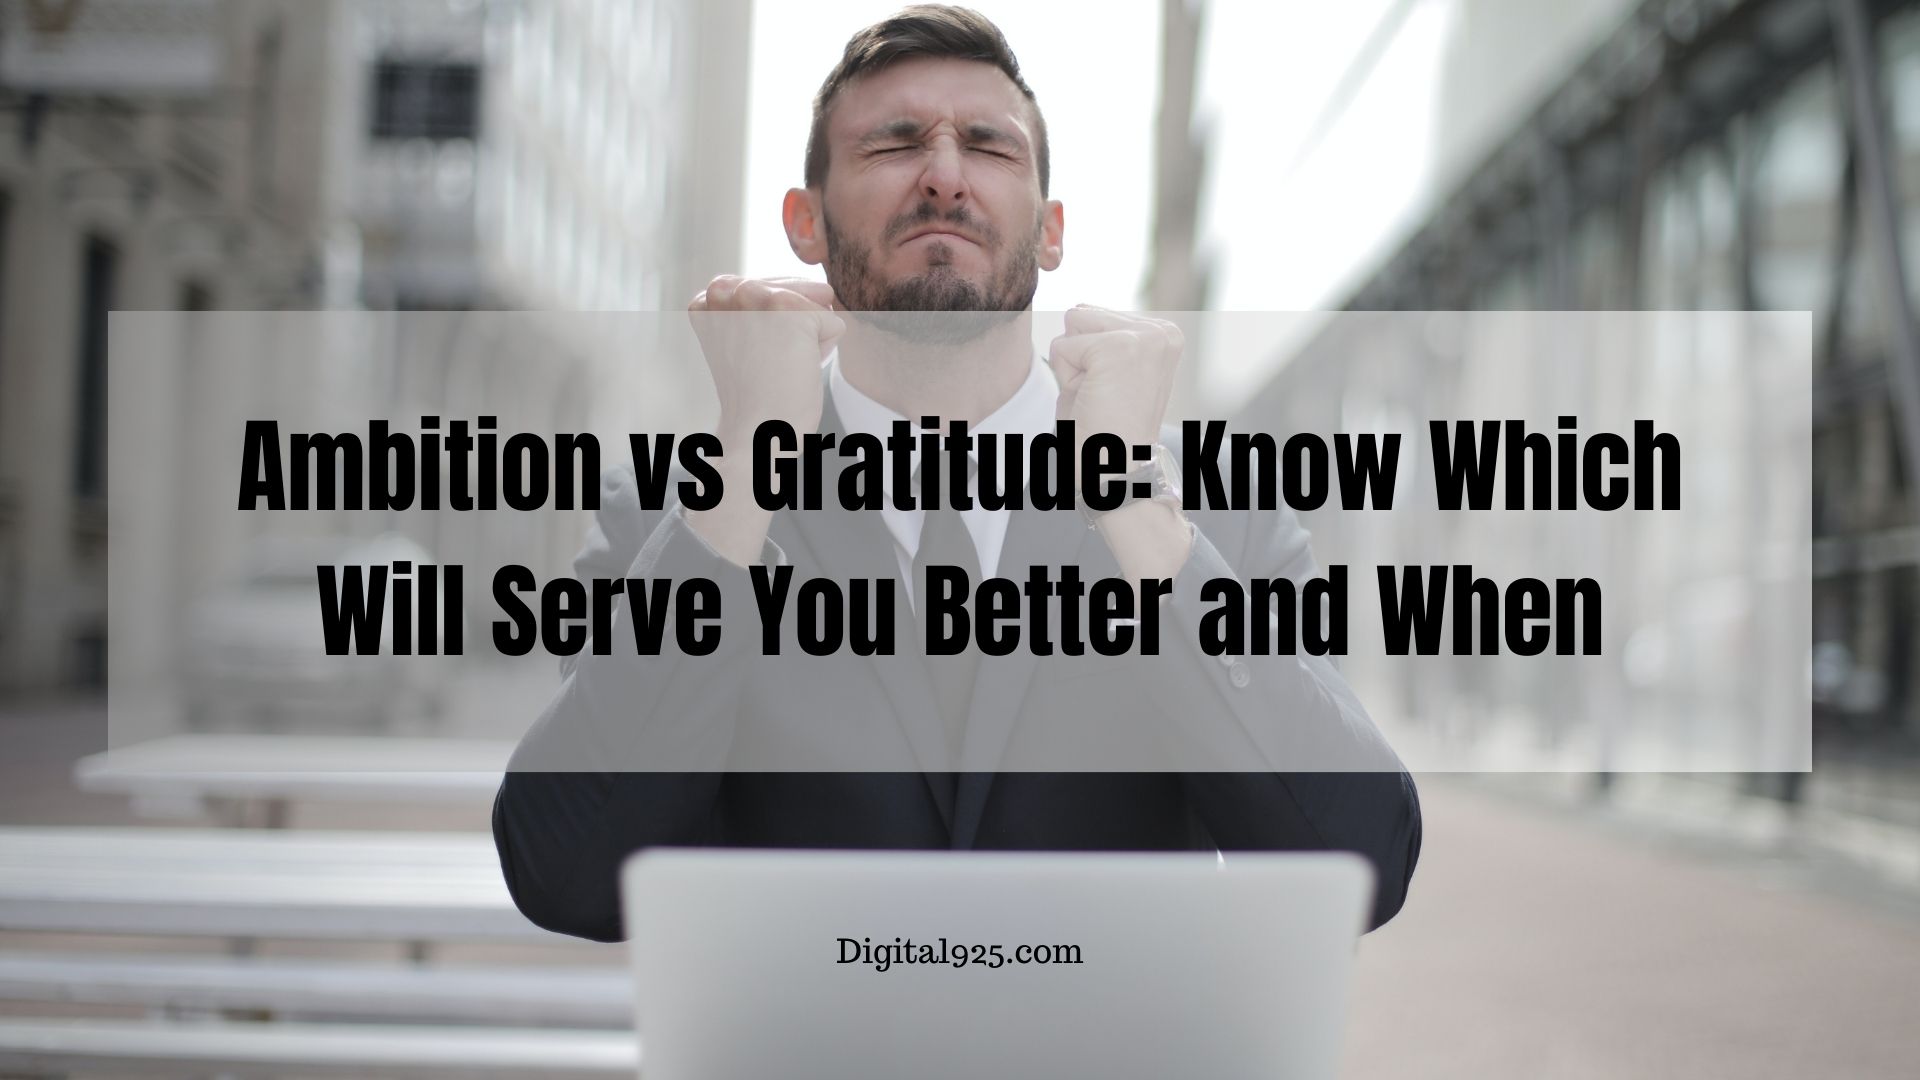 Ambition and Gratitude: Know Which Will Serve You Better and When